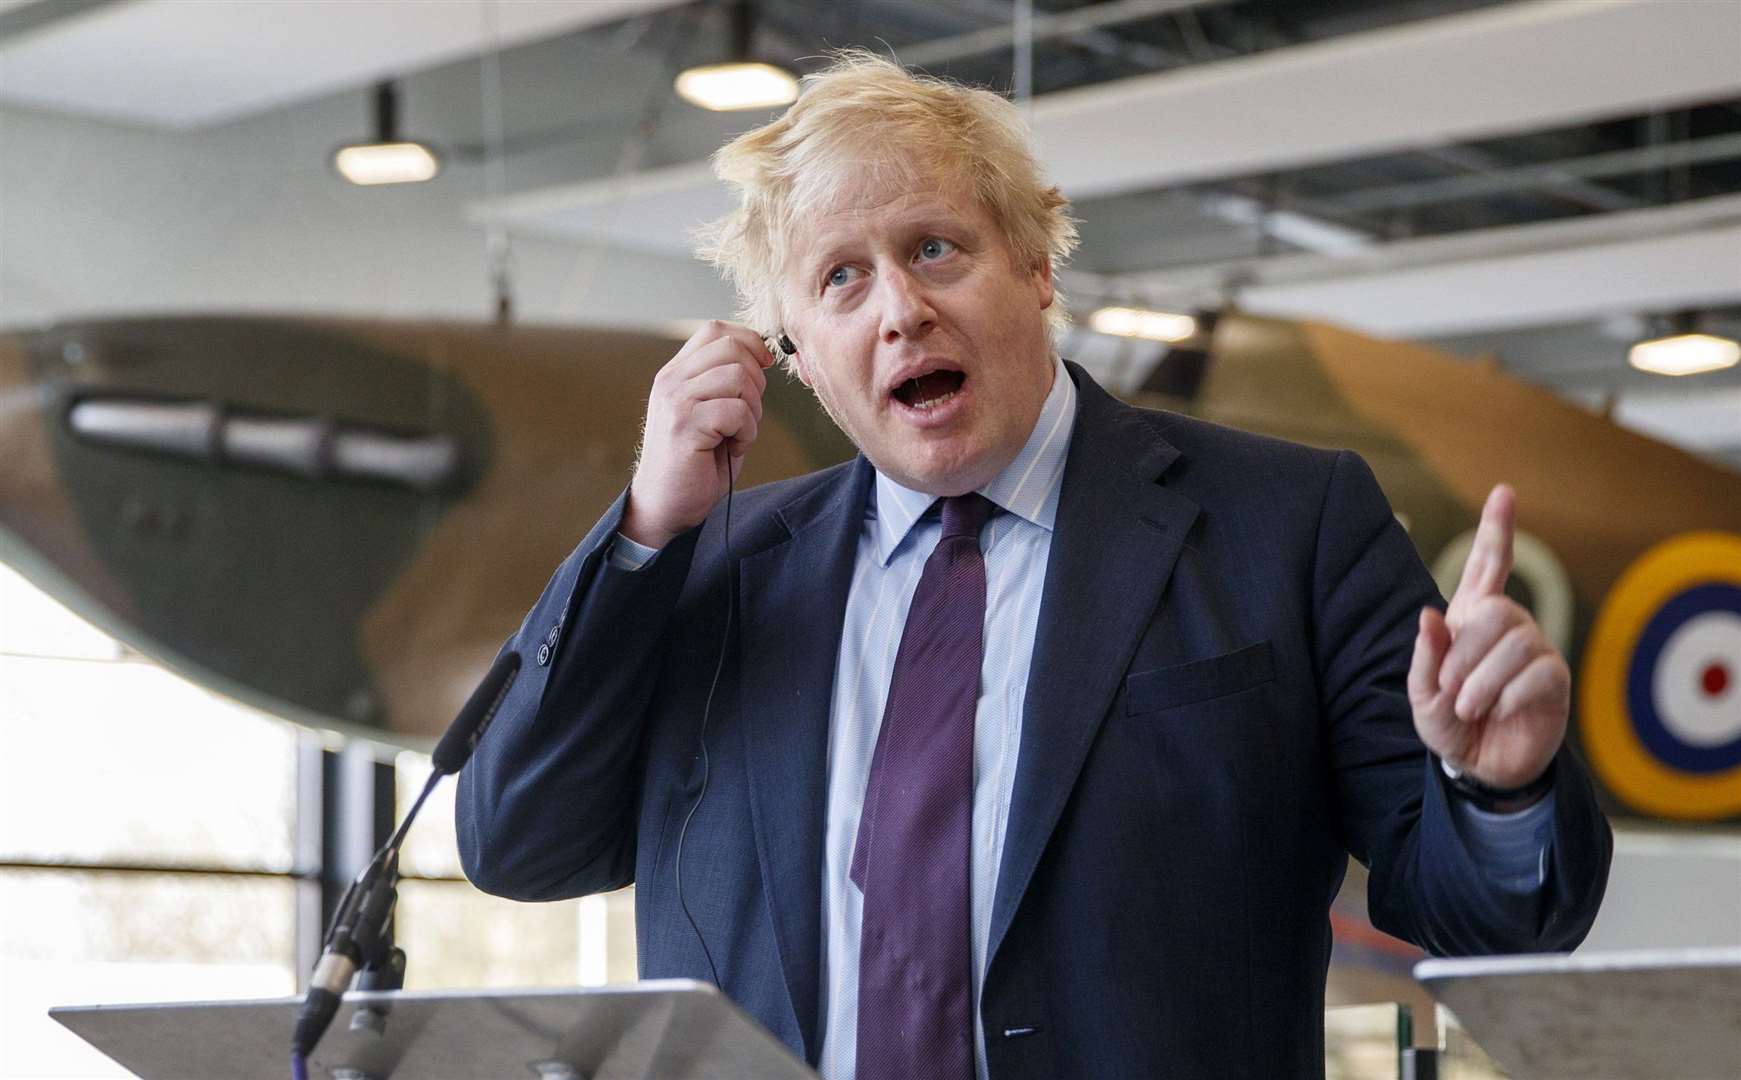 Boris Johnson has declared £1.8 billion in extra funding for the NHS